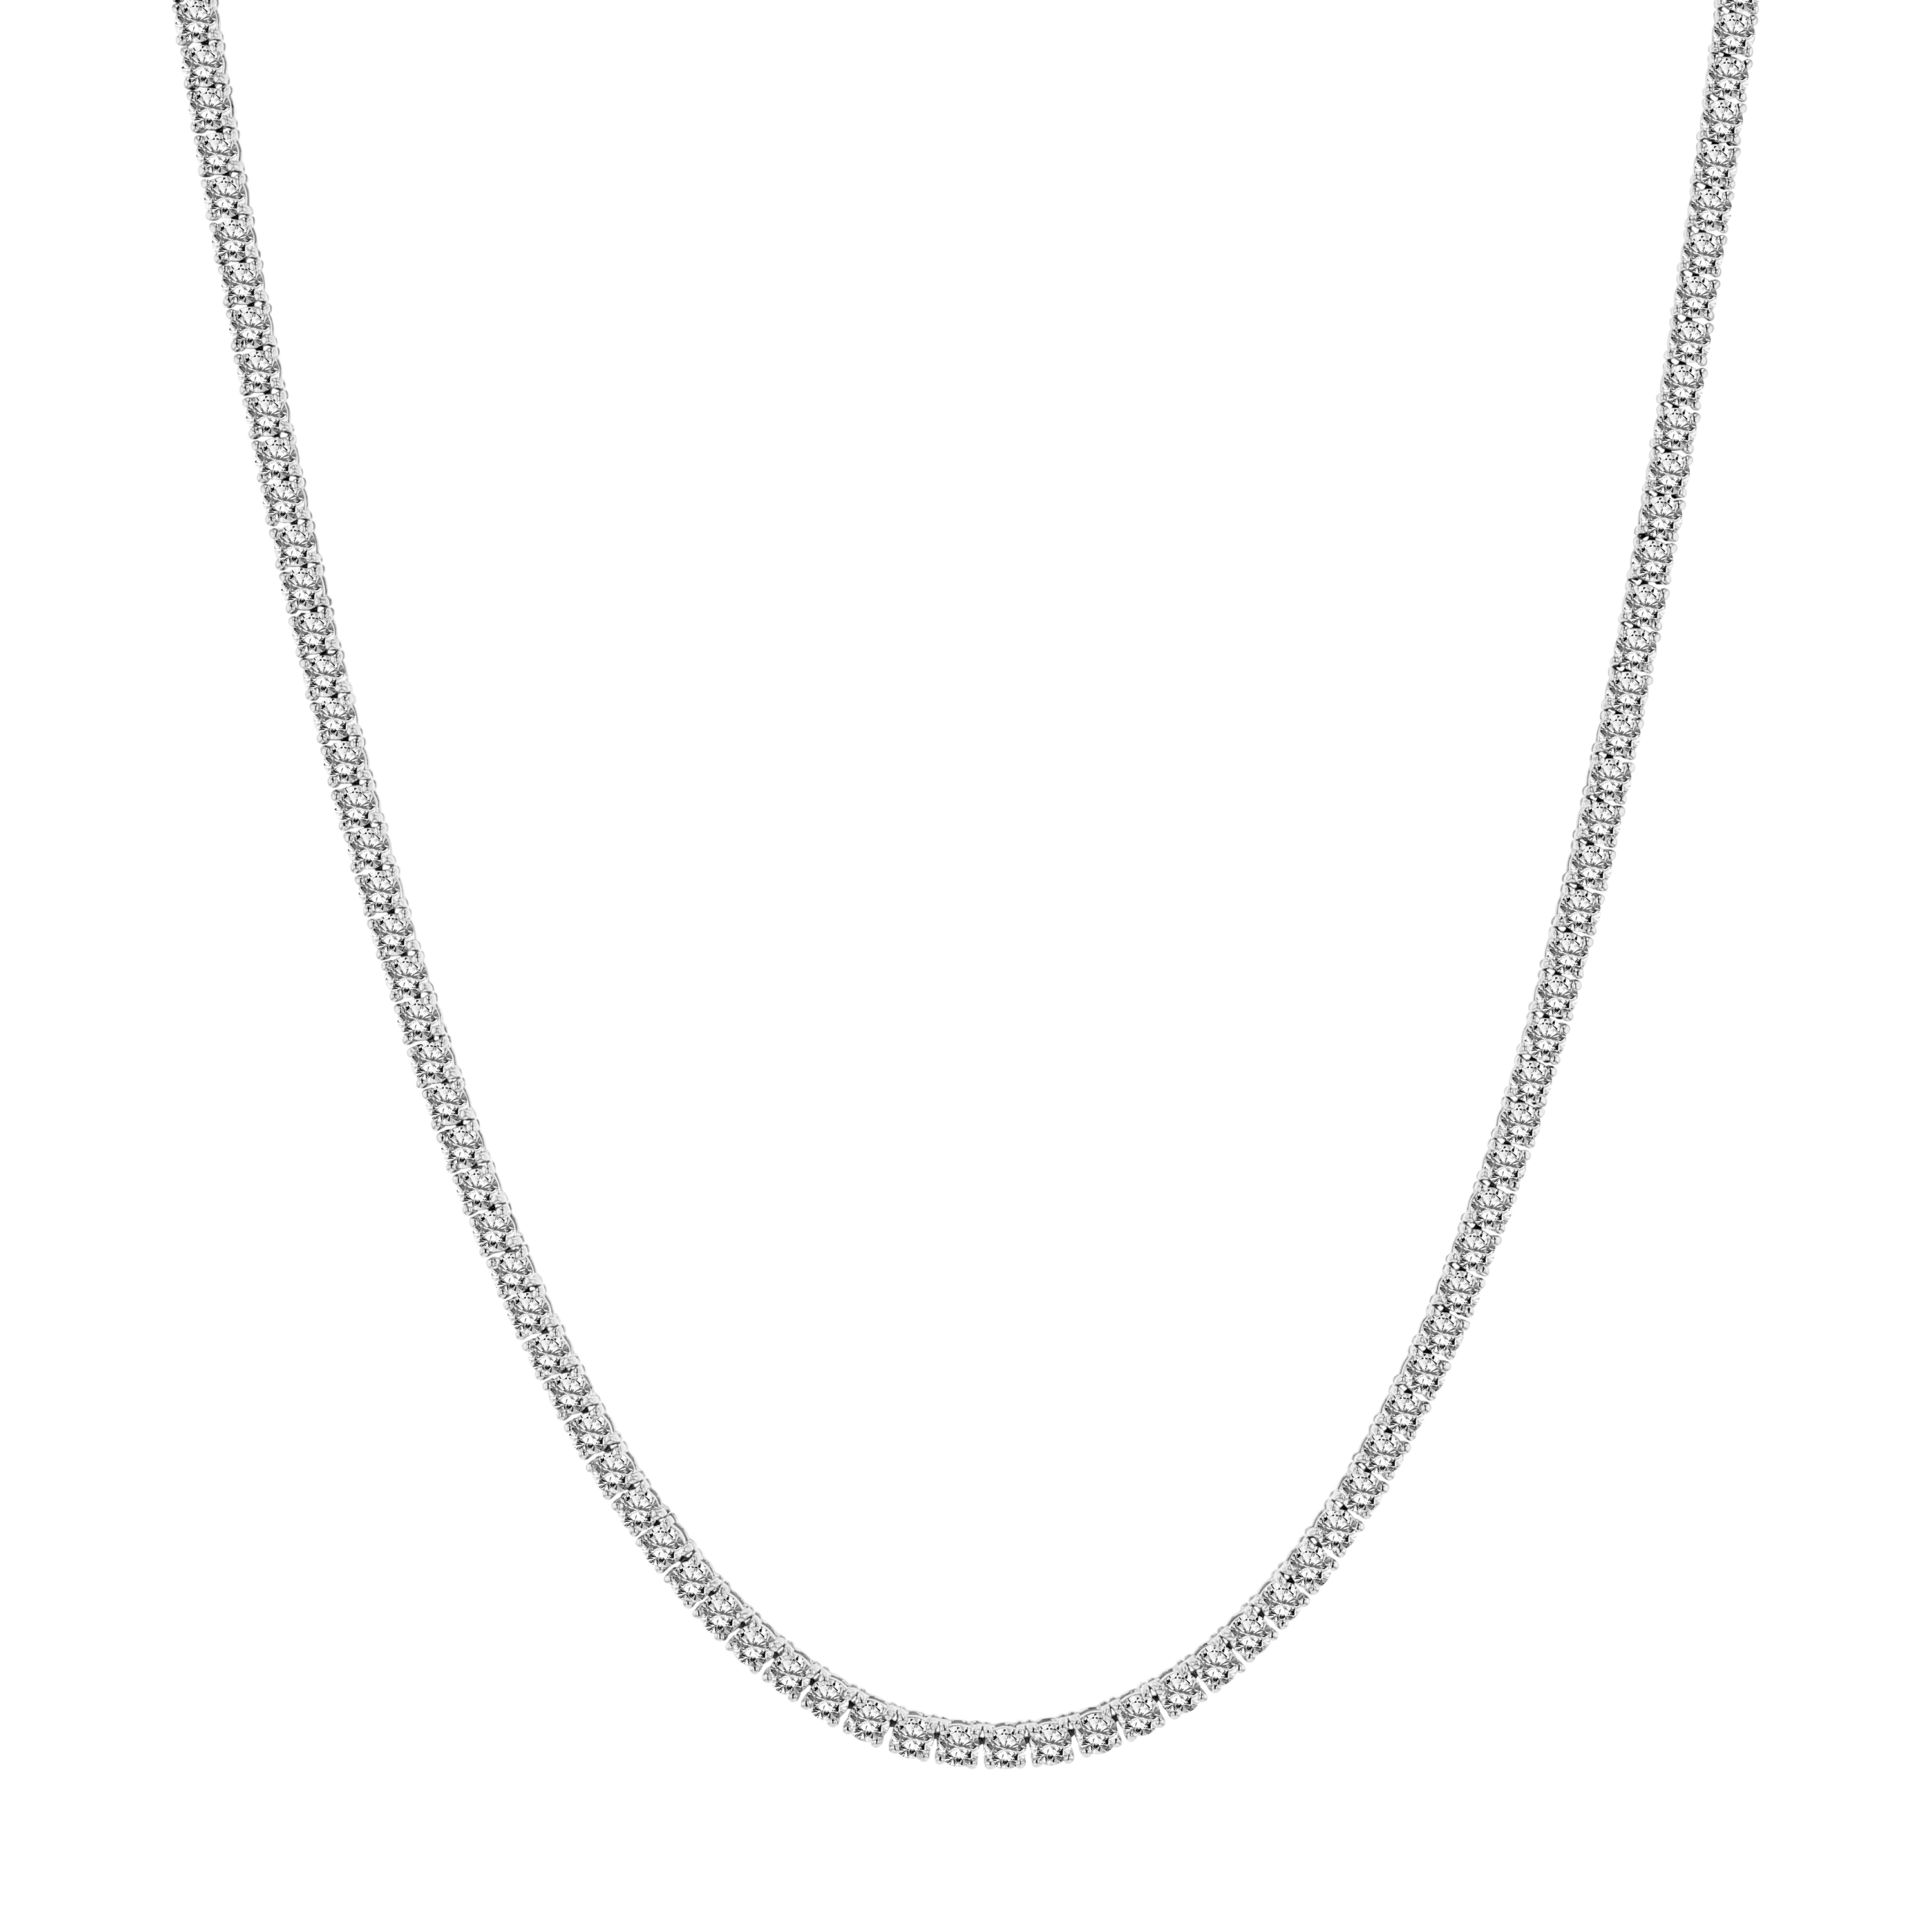 View 4.50ctw Diamond Straight Tennis Necklace in 14k Gold